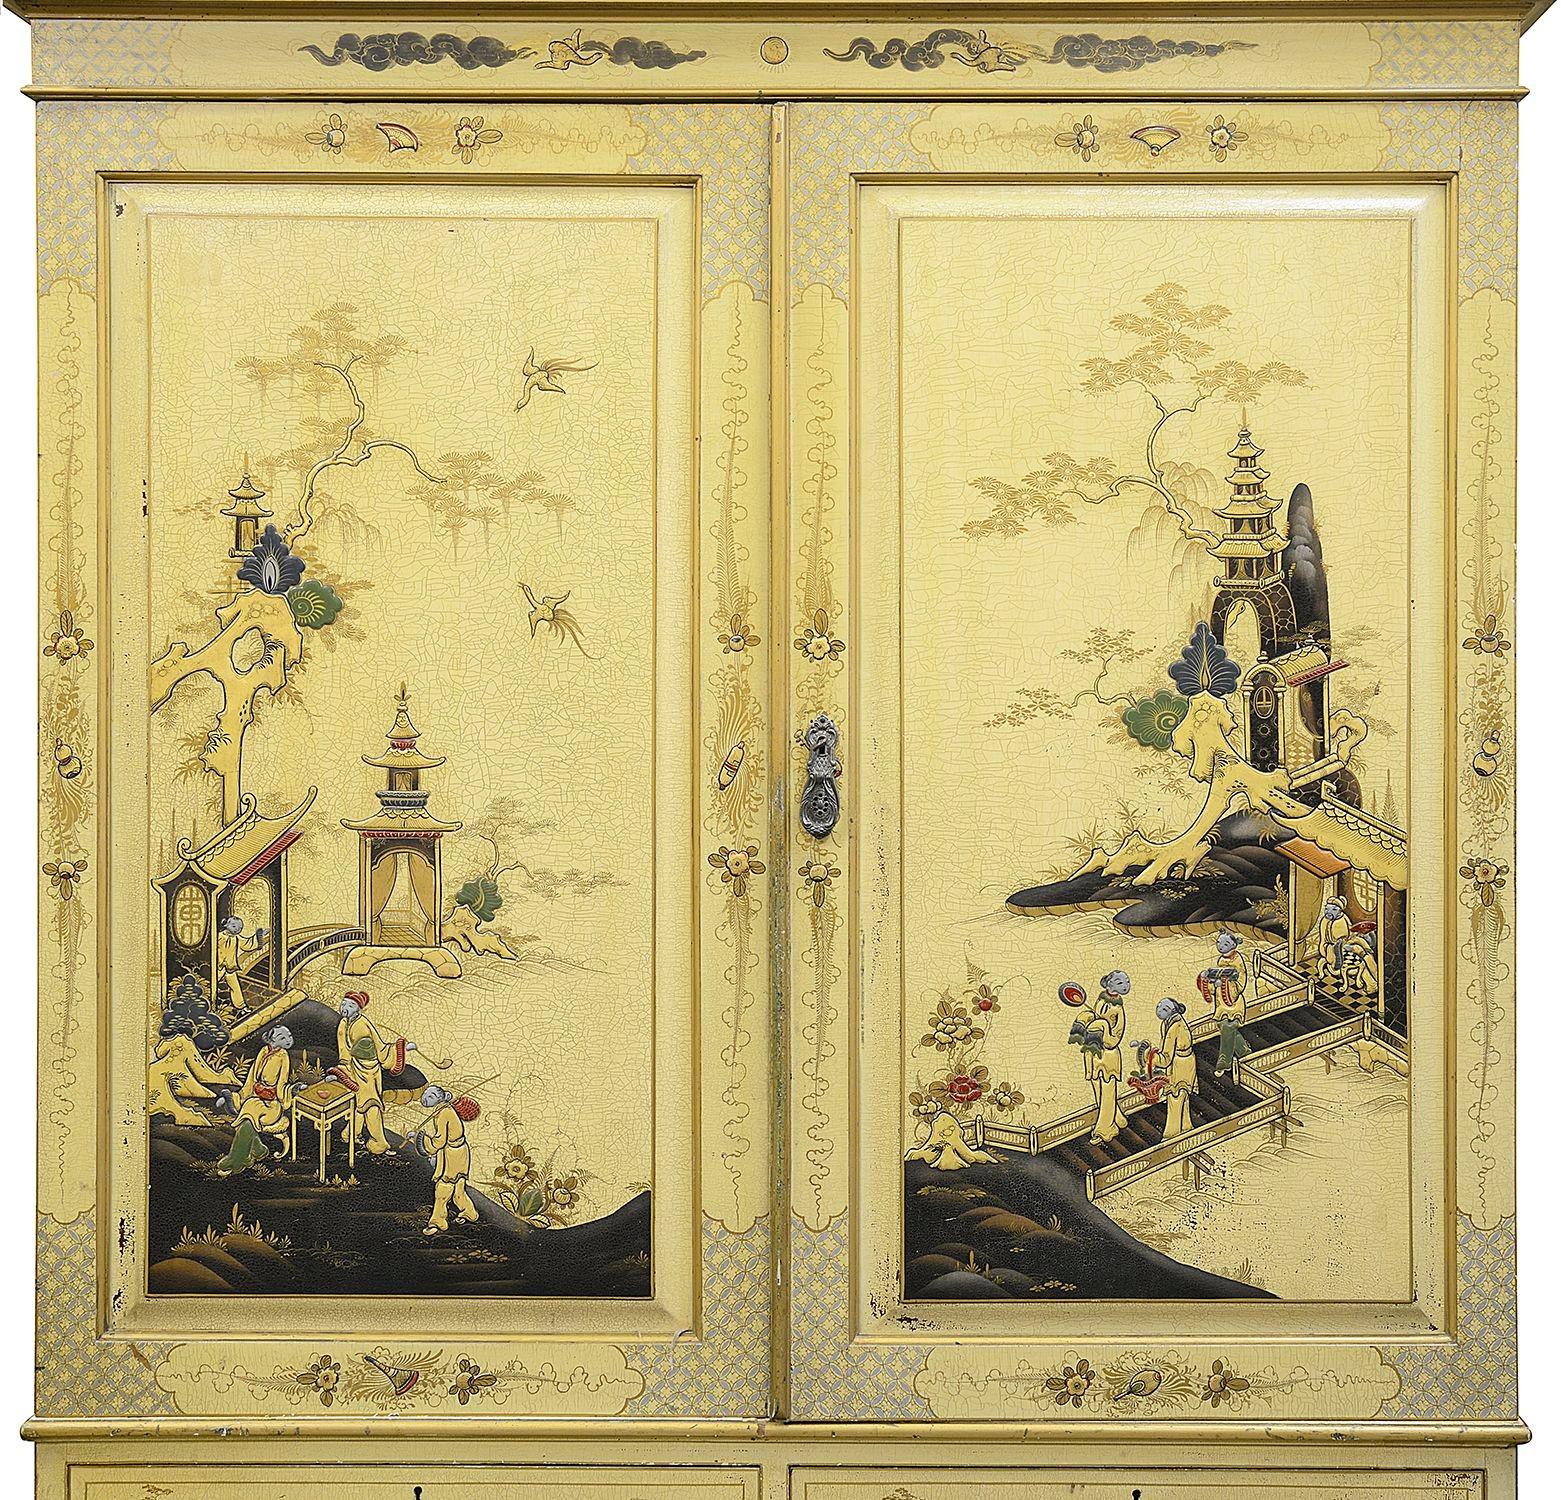 A very decorative 19th century cream painted chinoiserie lacquer Linen press, with wonderful hand painted classical oriental scenes to the front and sides, depicting pagoda buildings, trees, bridges, courtiers and fishermen in boats, two hinged